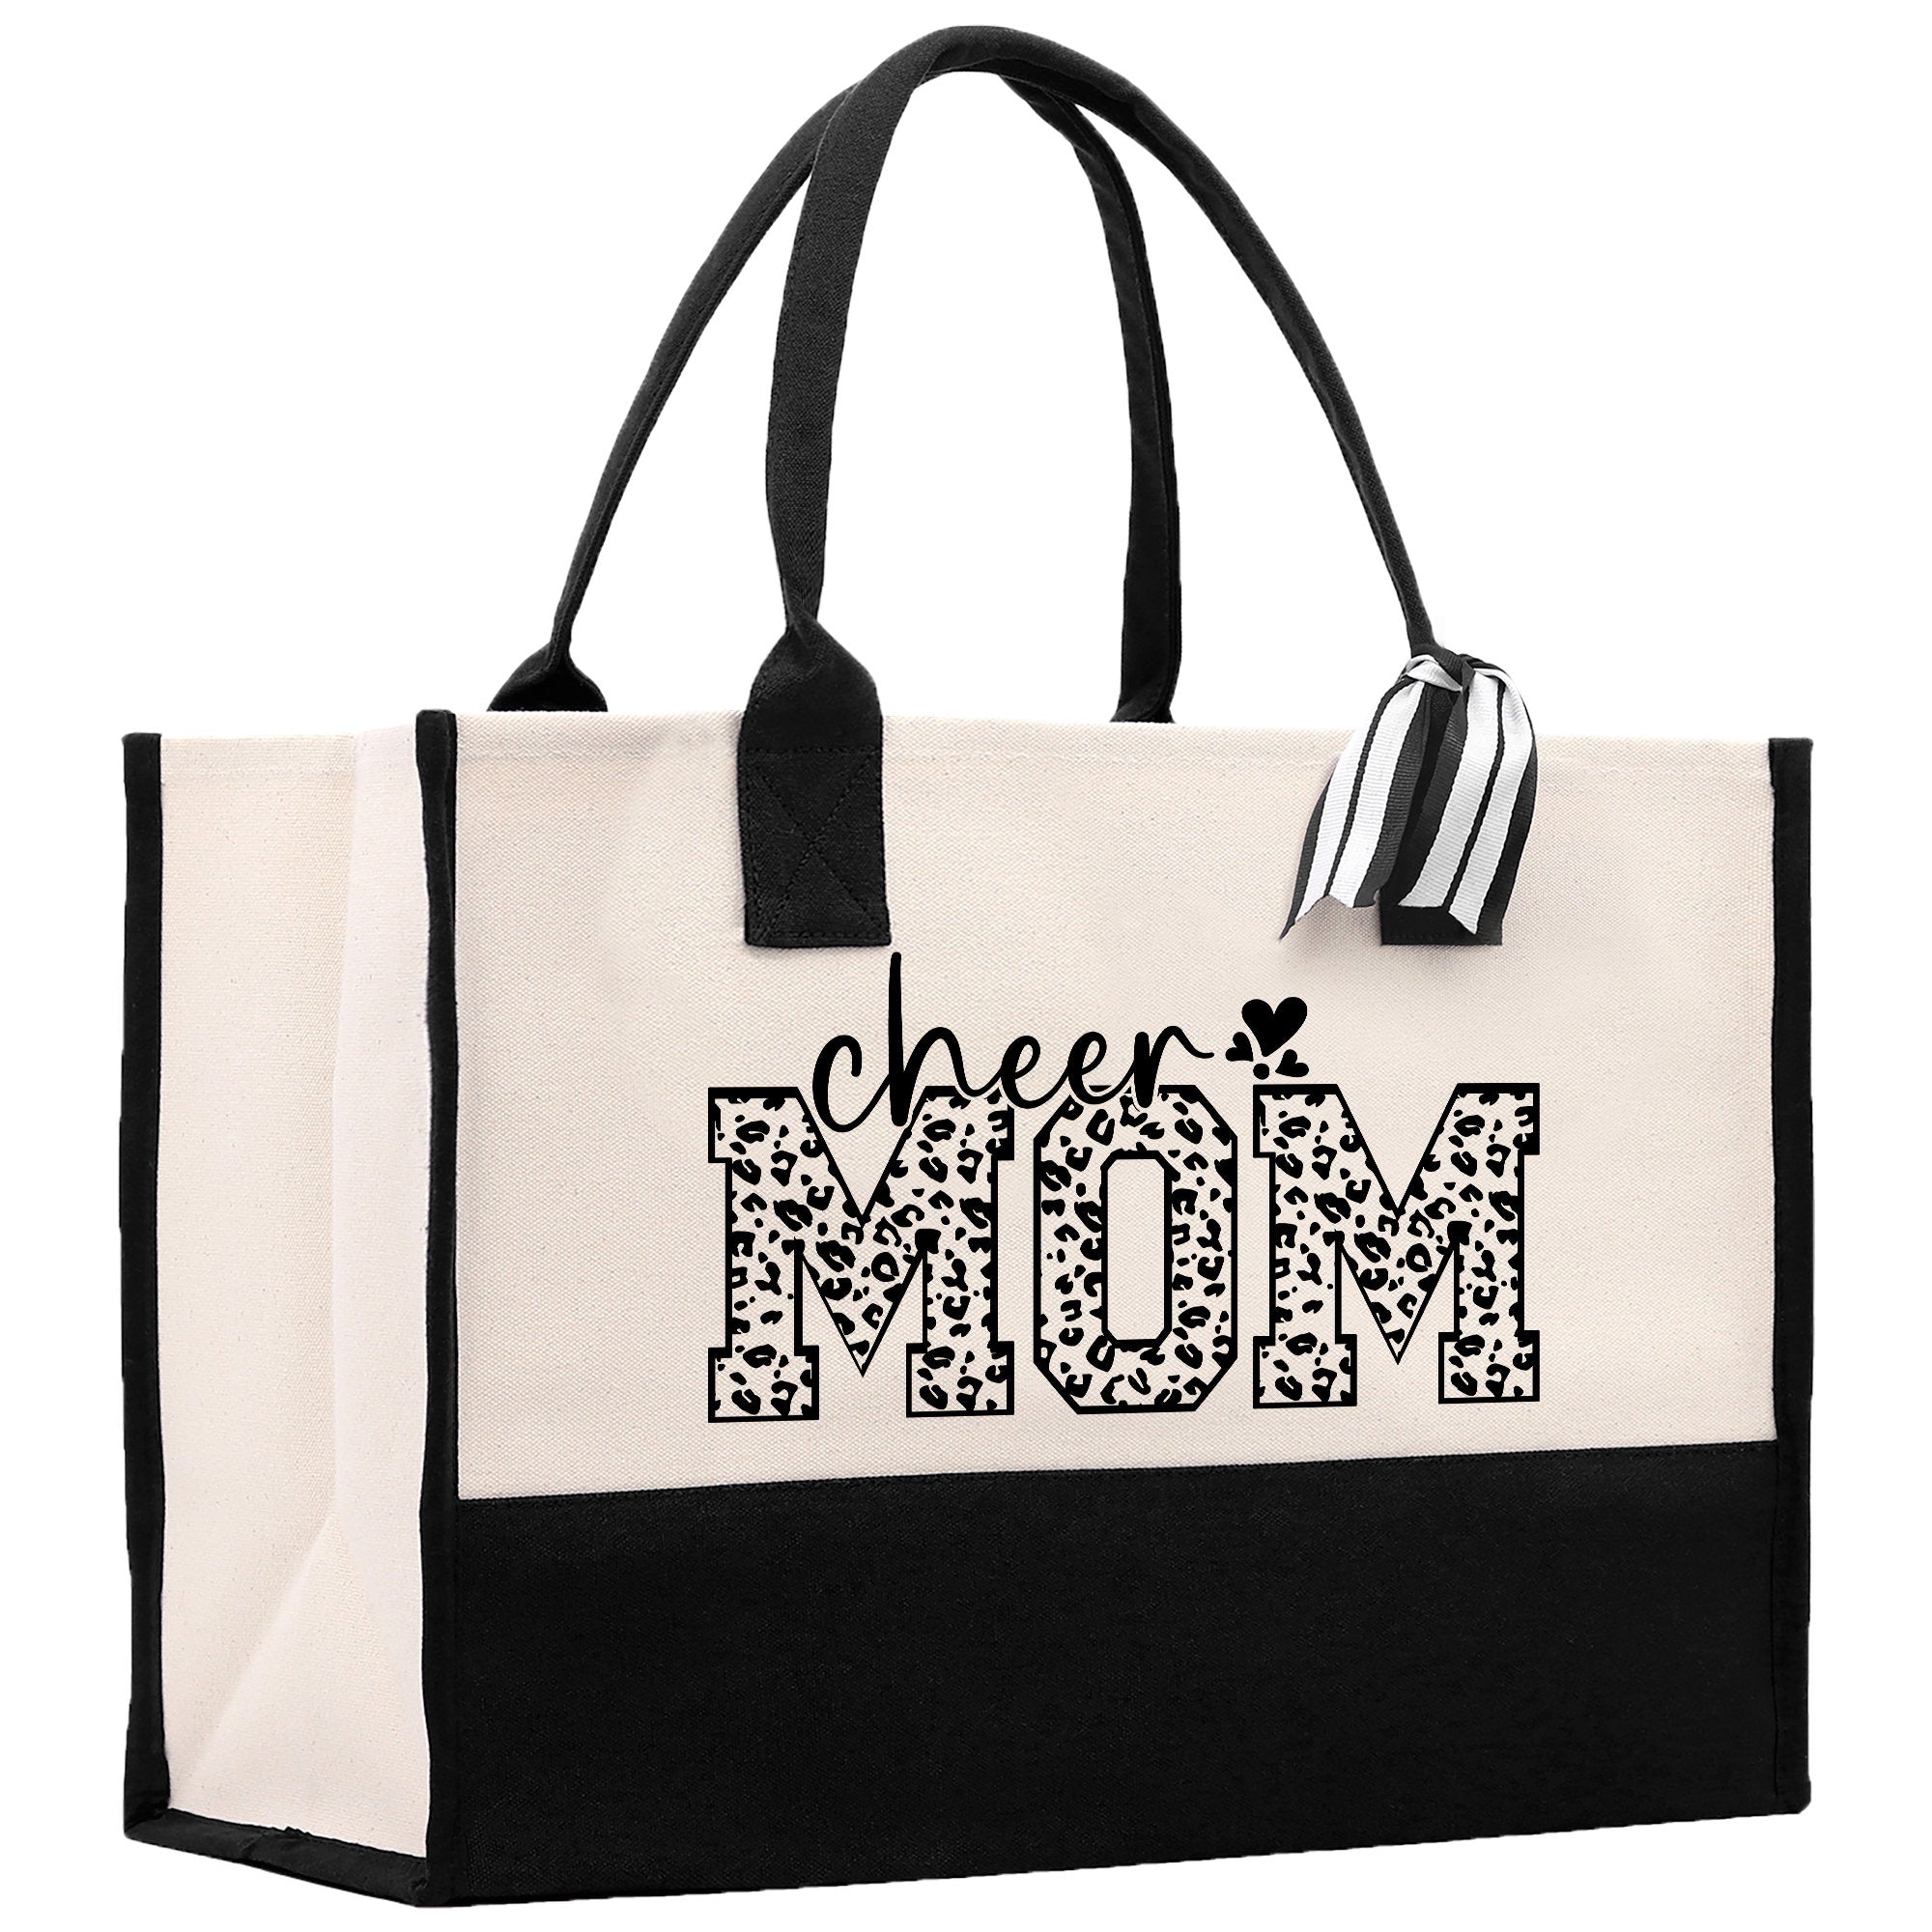 a black and white tote bag with the word cheer mom printed on it